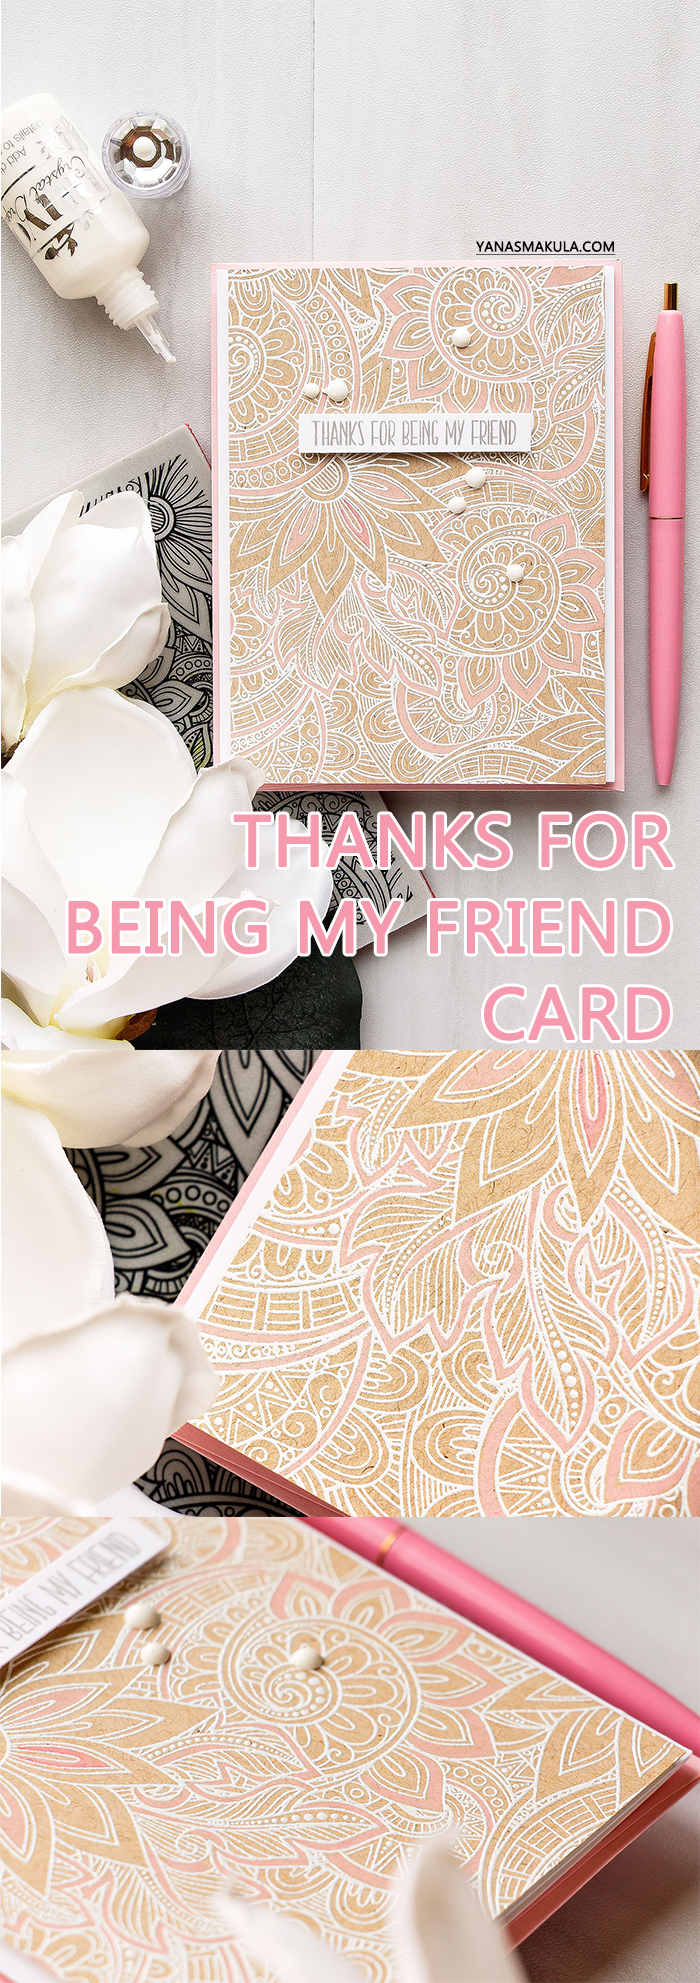 Simon Says Stamp | Thanks For Being My Friend card by Yana Smakula. Using SSS101763 Ornate Background stamp. #stamping #simonsaysstamp #yanasmakula